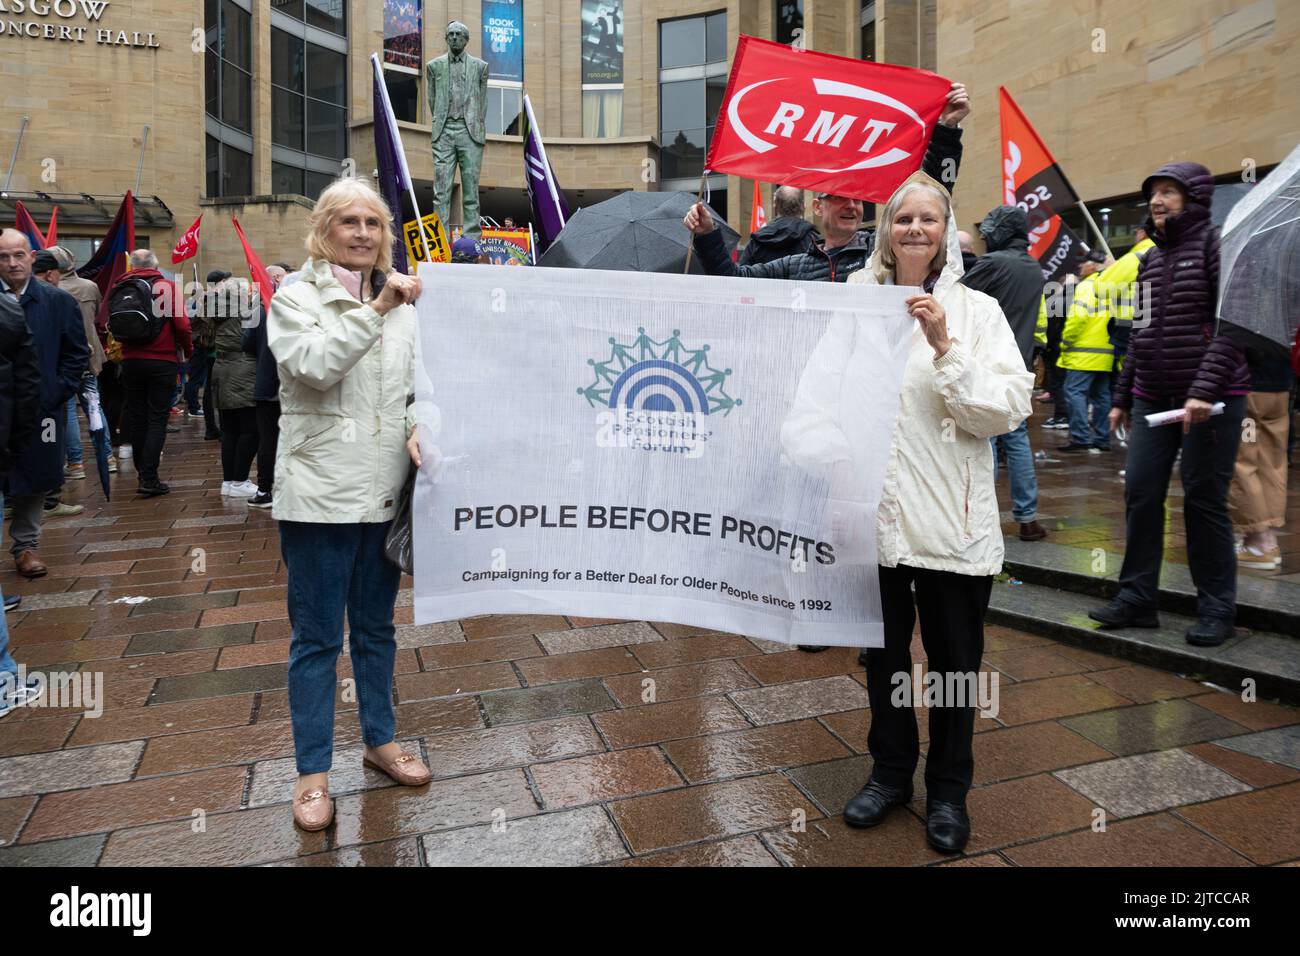 Scottish Pensioners Forum People before profits banner held by demonstrators at joint union strike rally, Glasgow, Scotland, UK 26 August 2022 Stock Photo